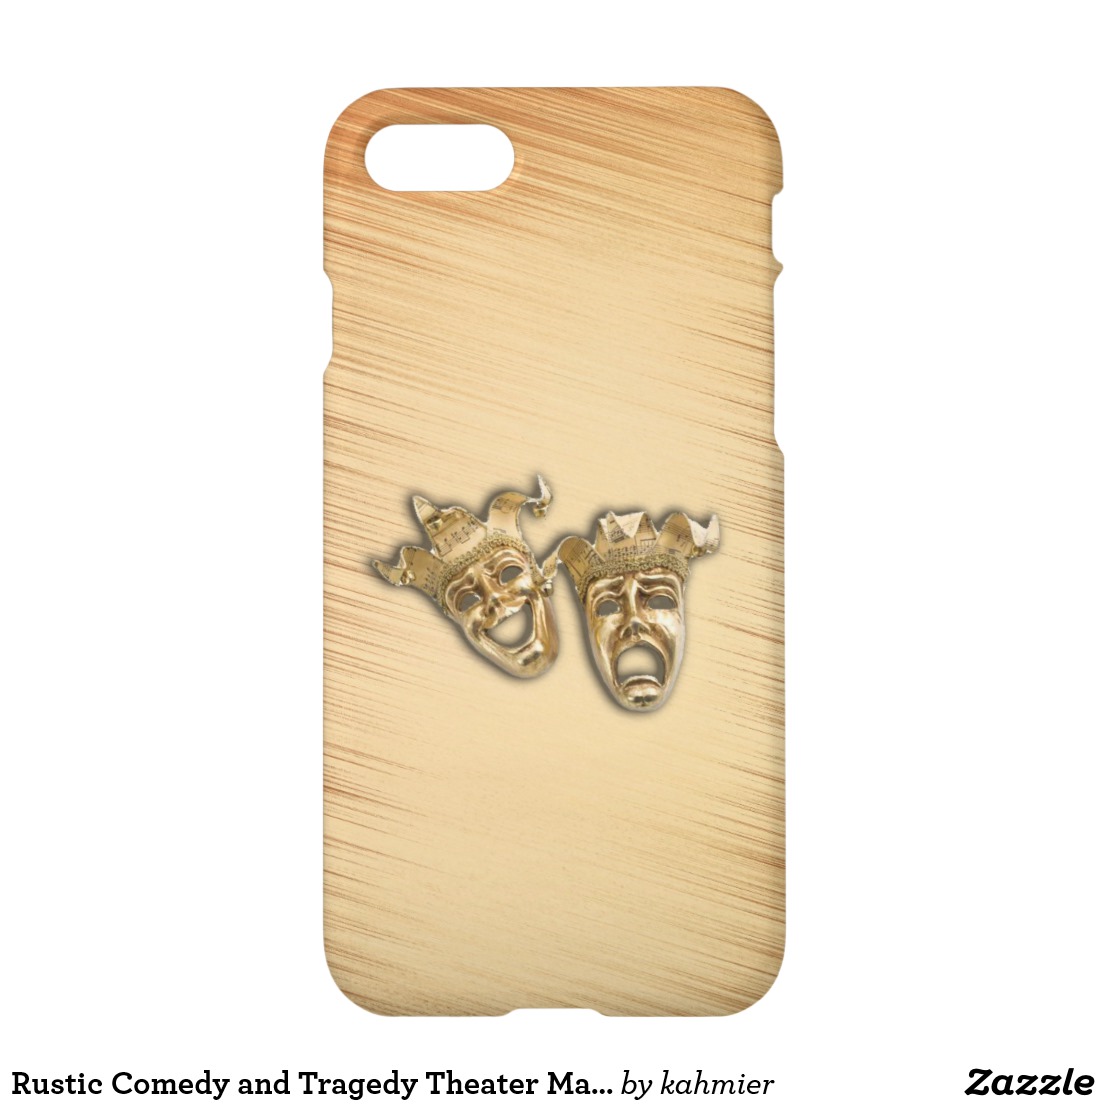 Rustic Comedy and Tragedy Theater Masks iPhone 8/7 Case